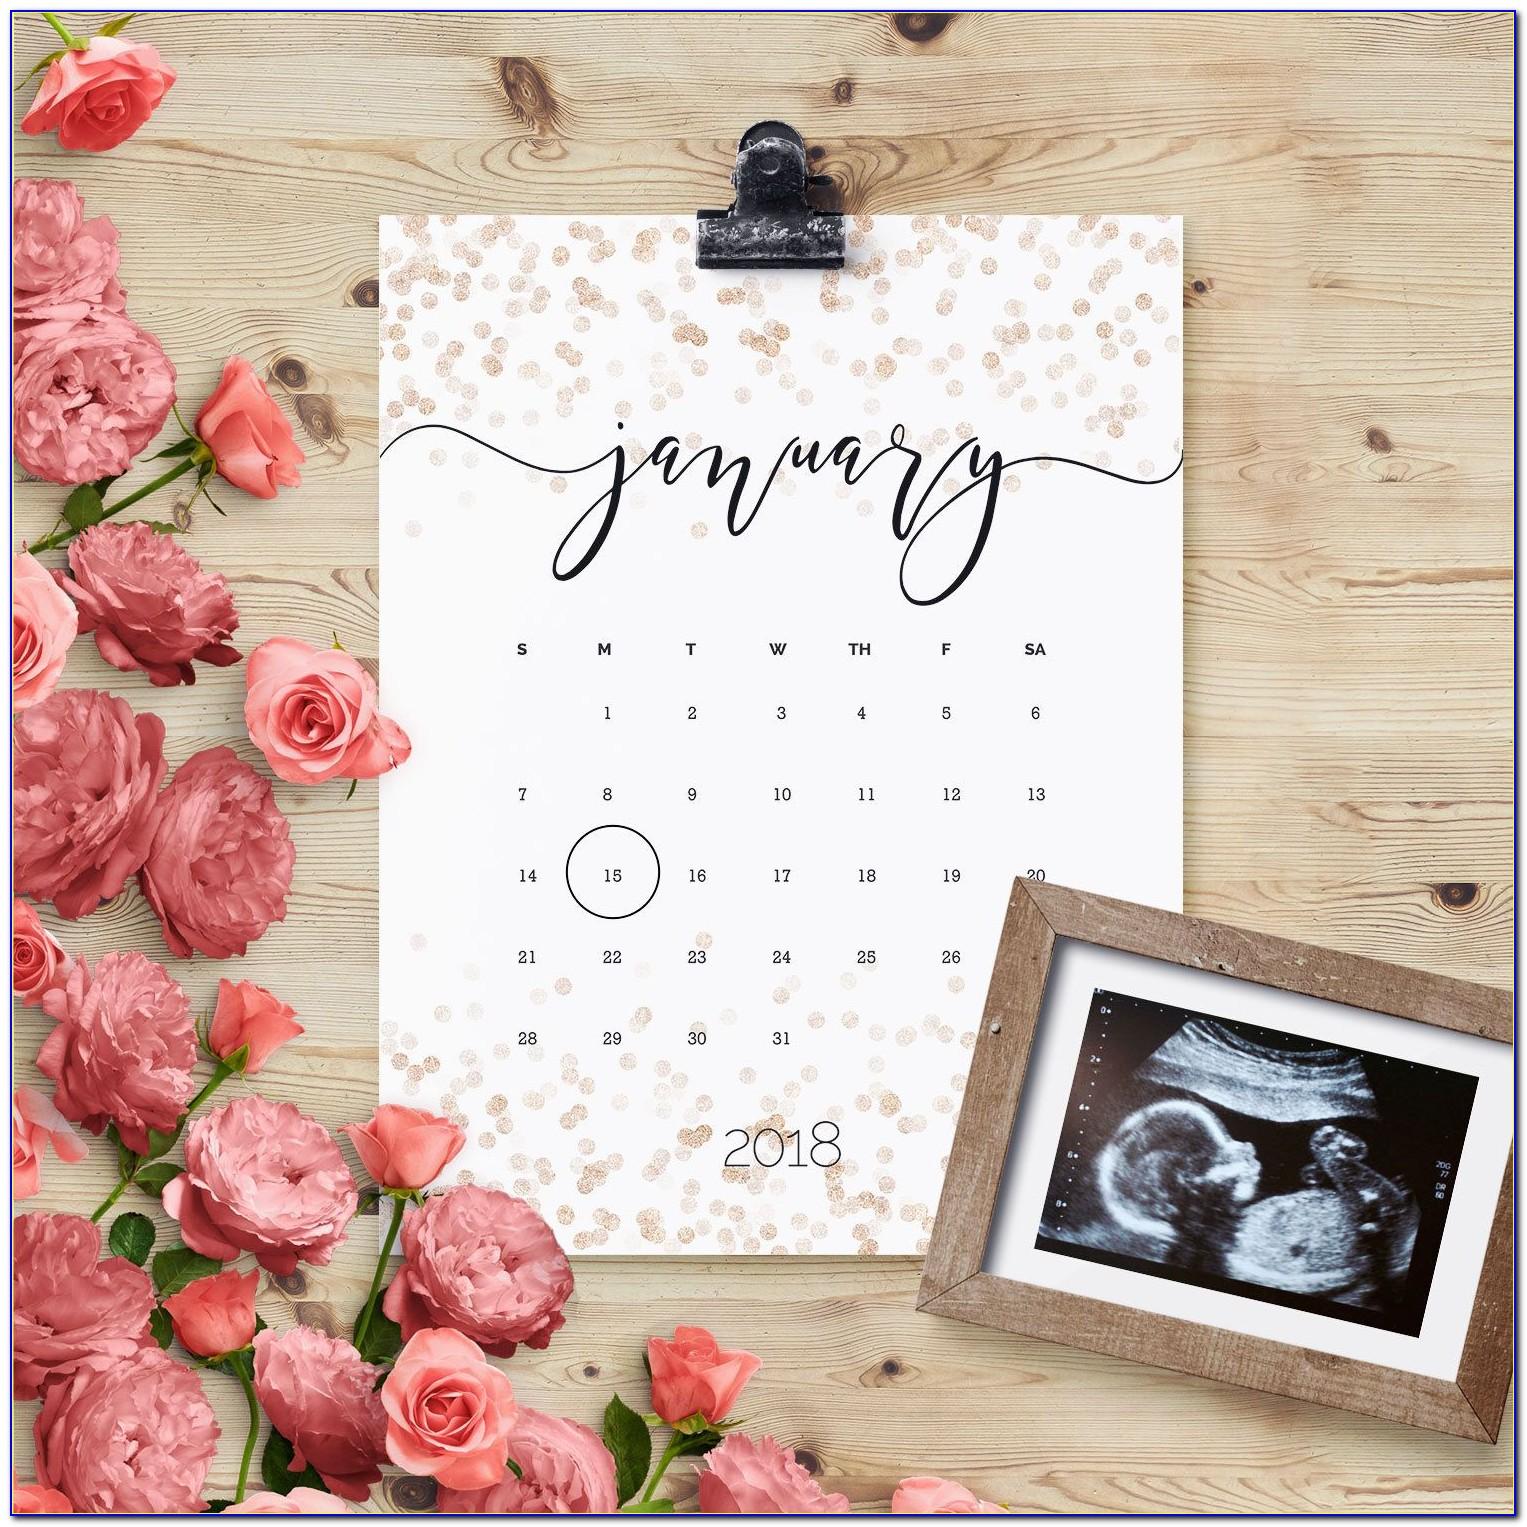 Free Pregnancy Announcement Template For Facebook